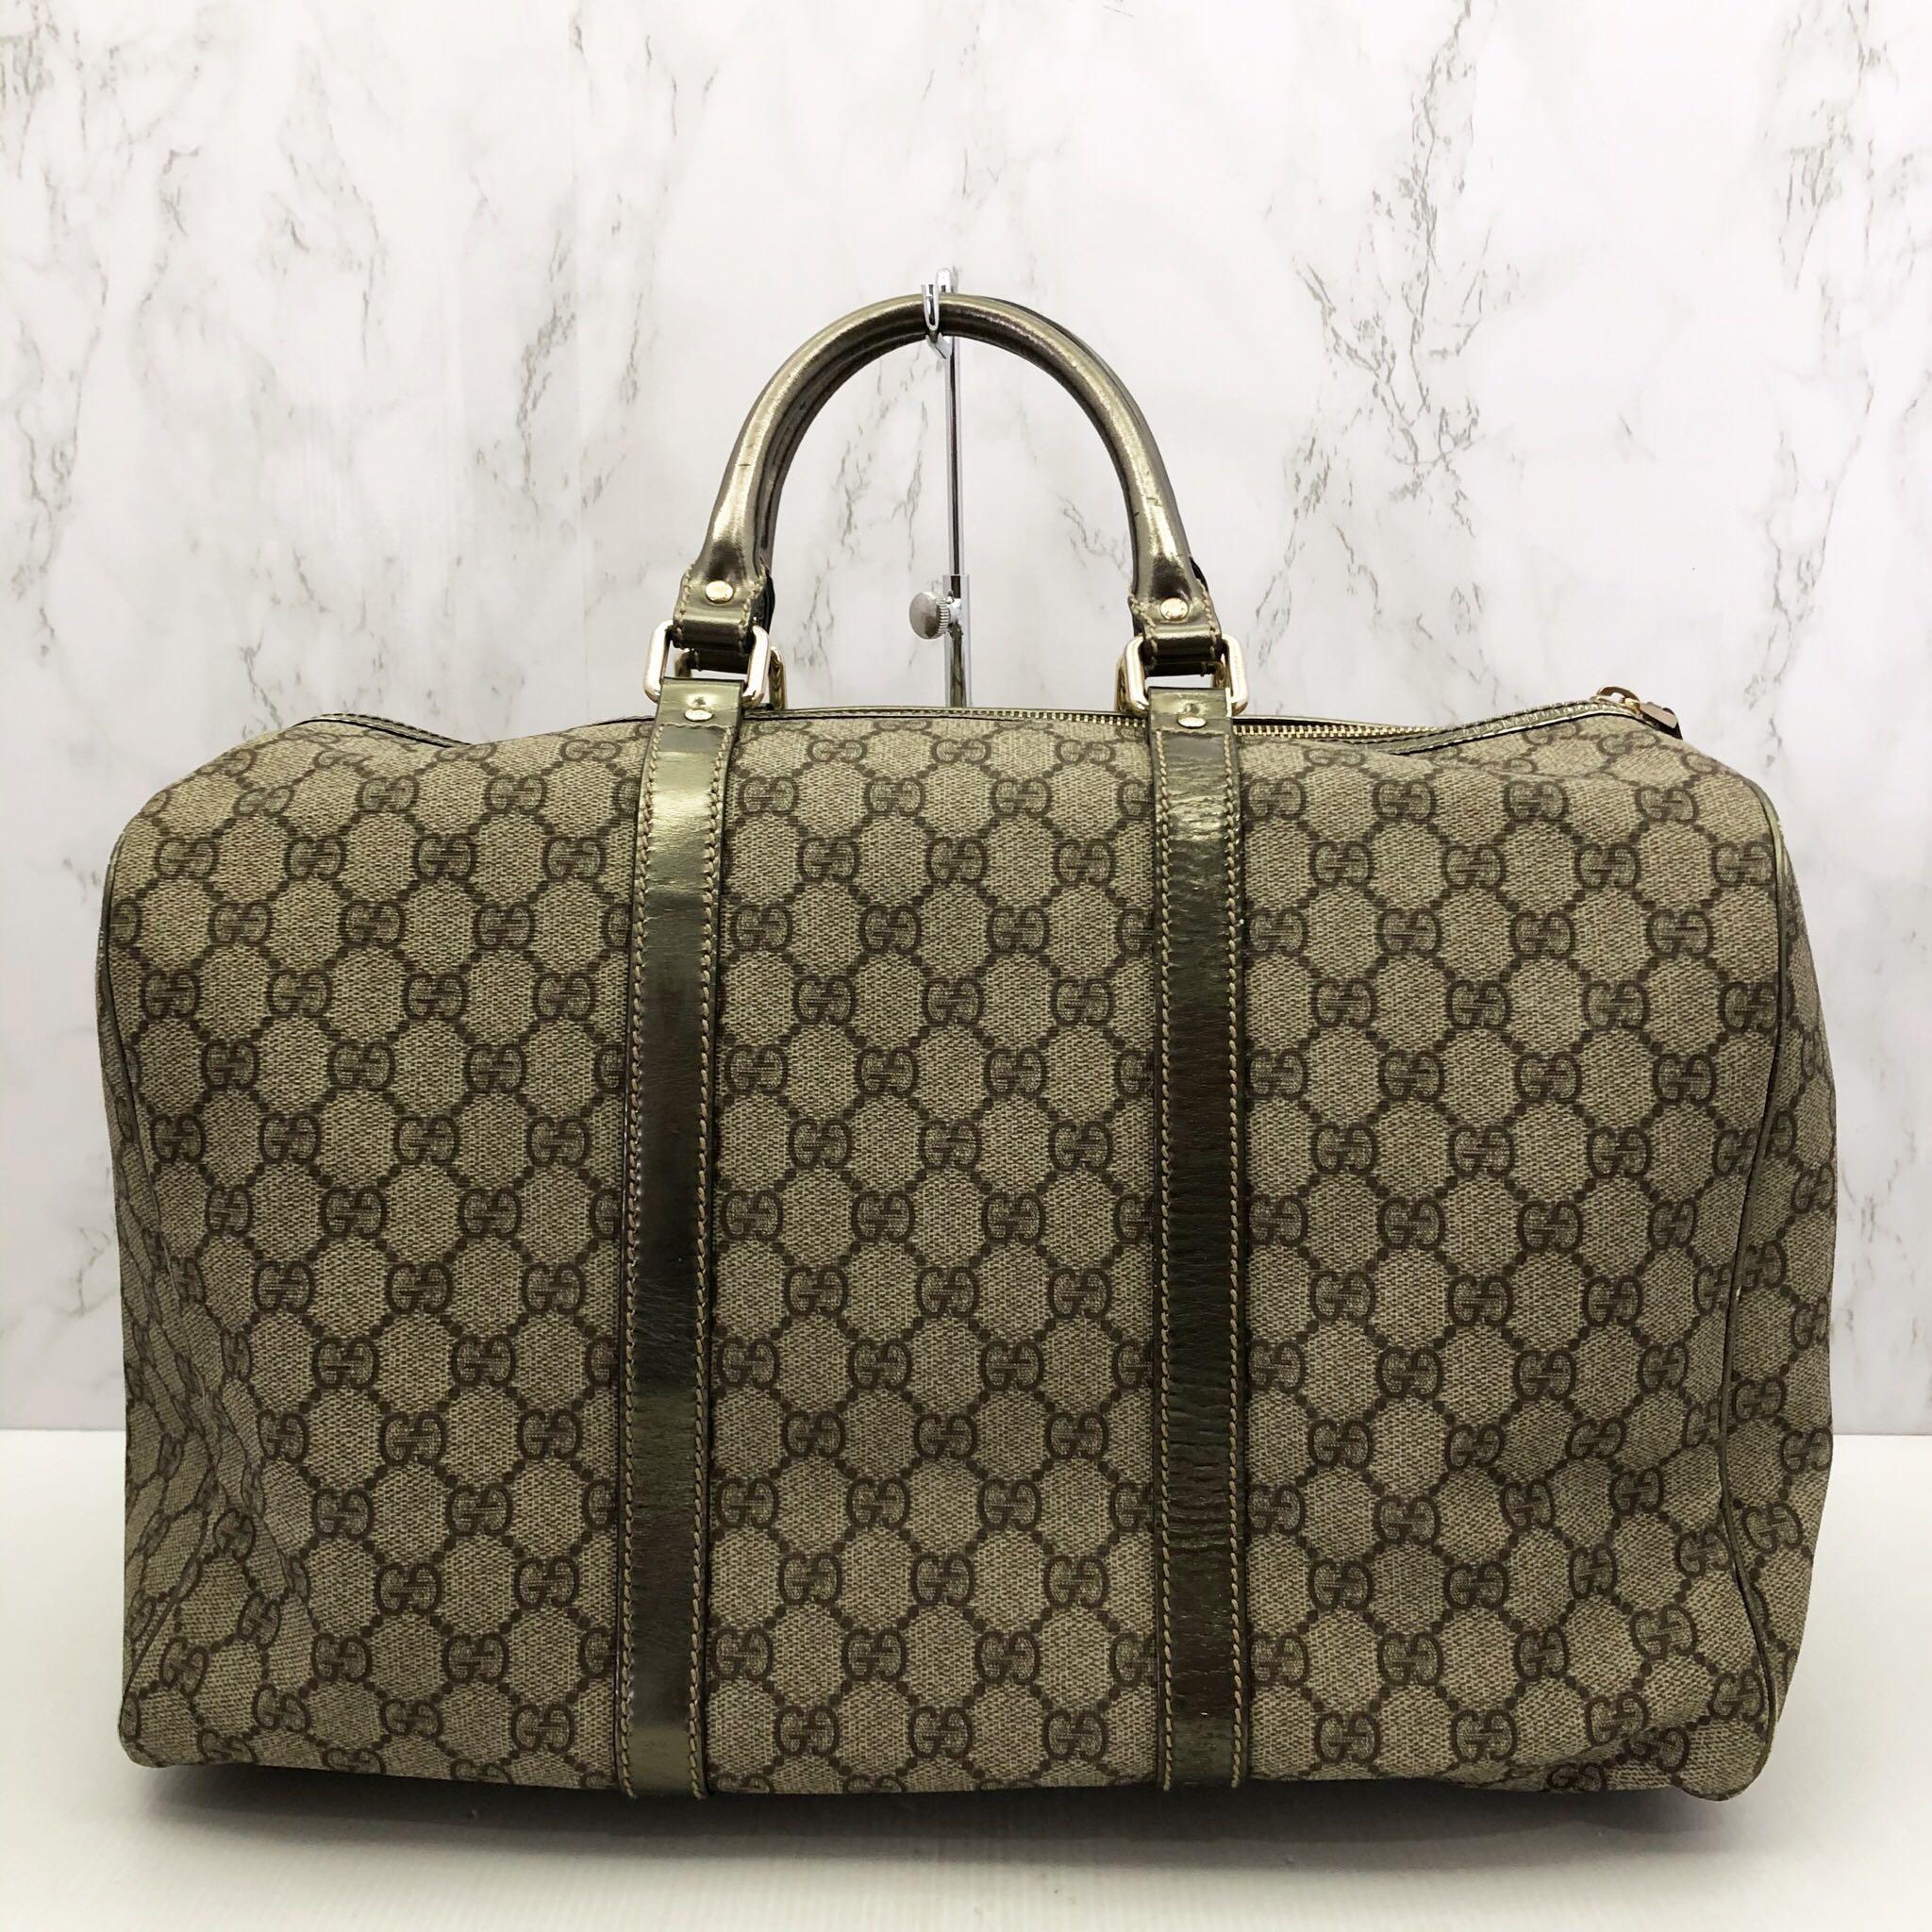 GUCCI GG 193602 CANVAS TOTE BAG 217010033 ,, Luxury, Bags 